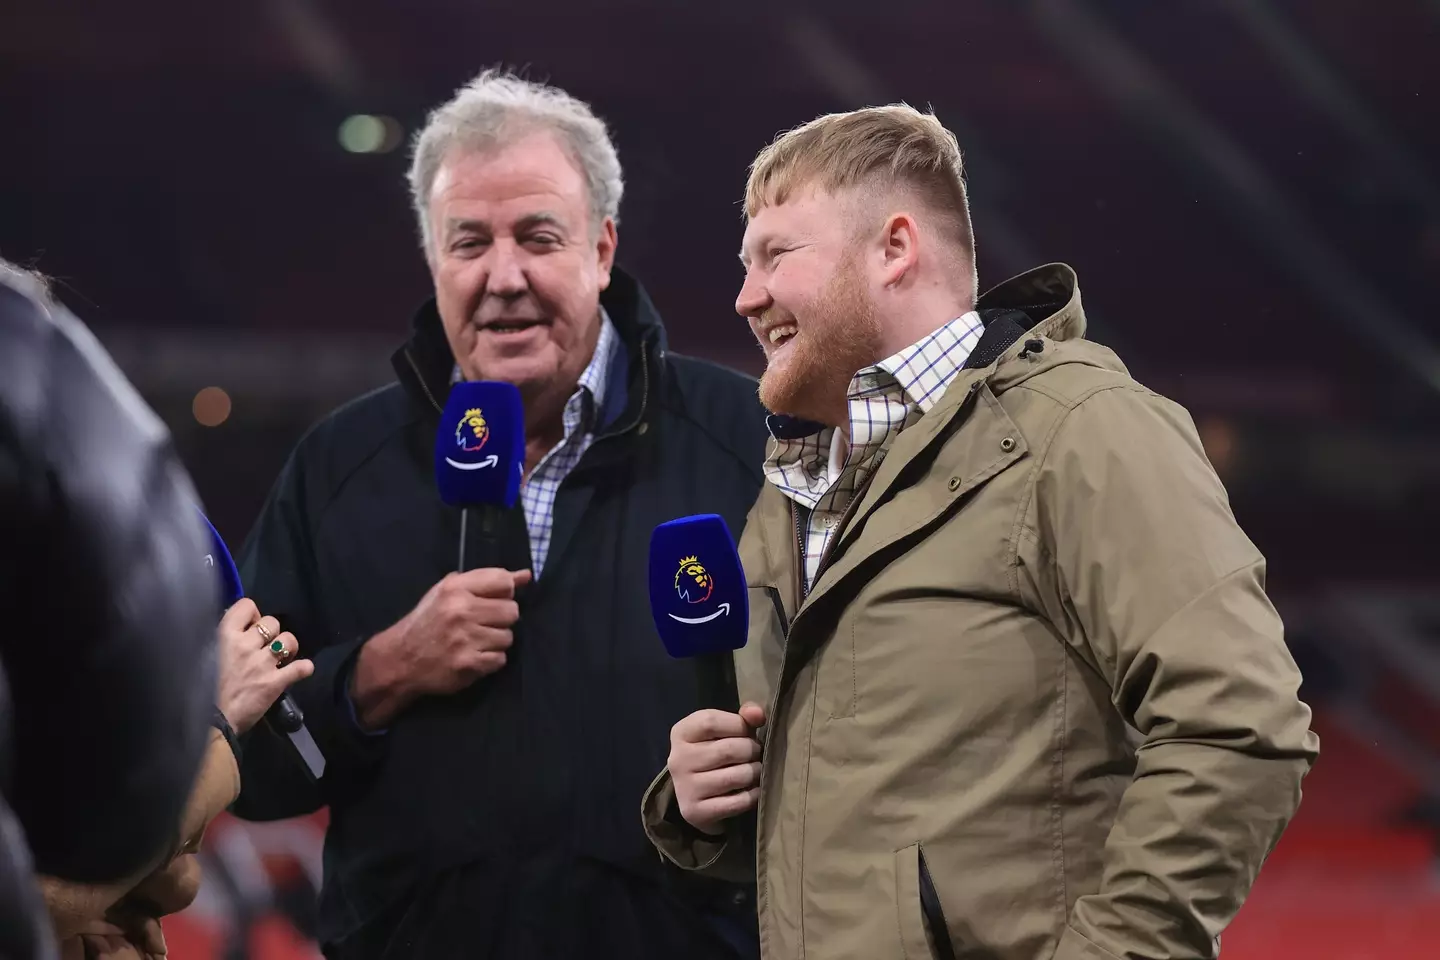 Kaleb Cooper and Jeremy Clarkson at Old Trafford. (Simon Stacpoole/Offside/Offside via Getty Images)